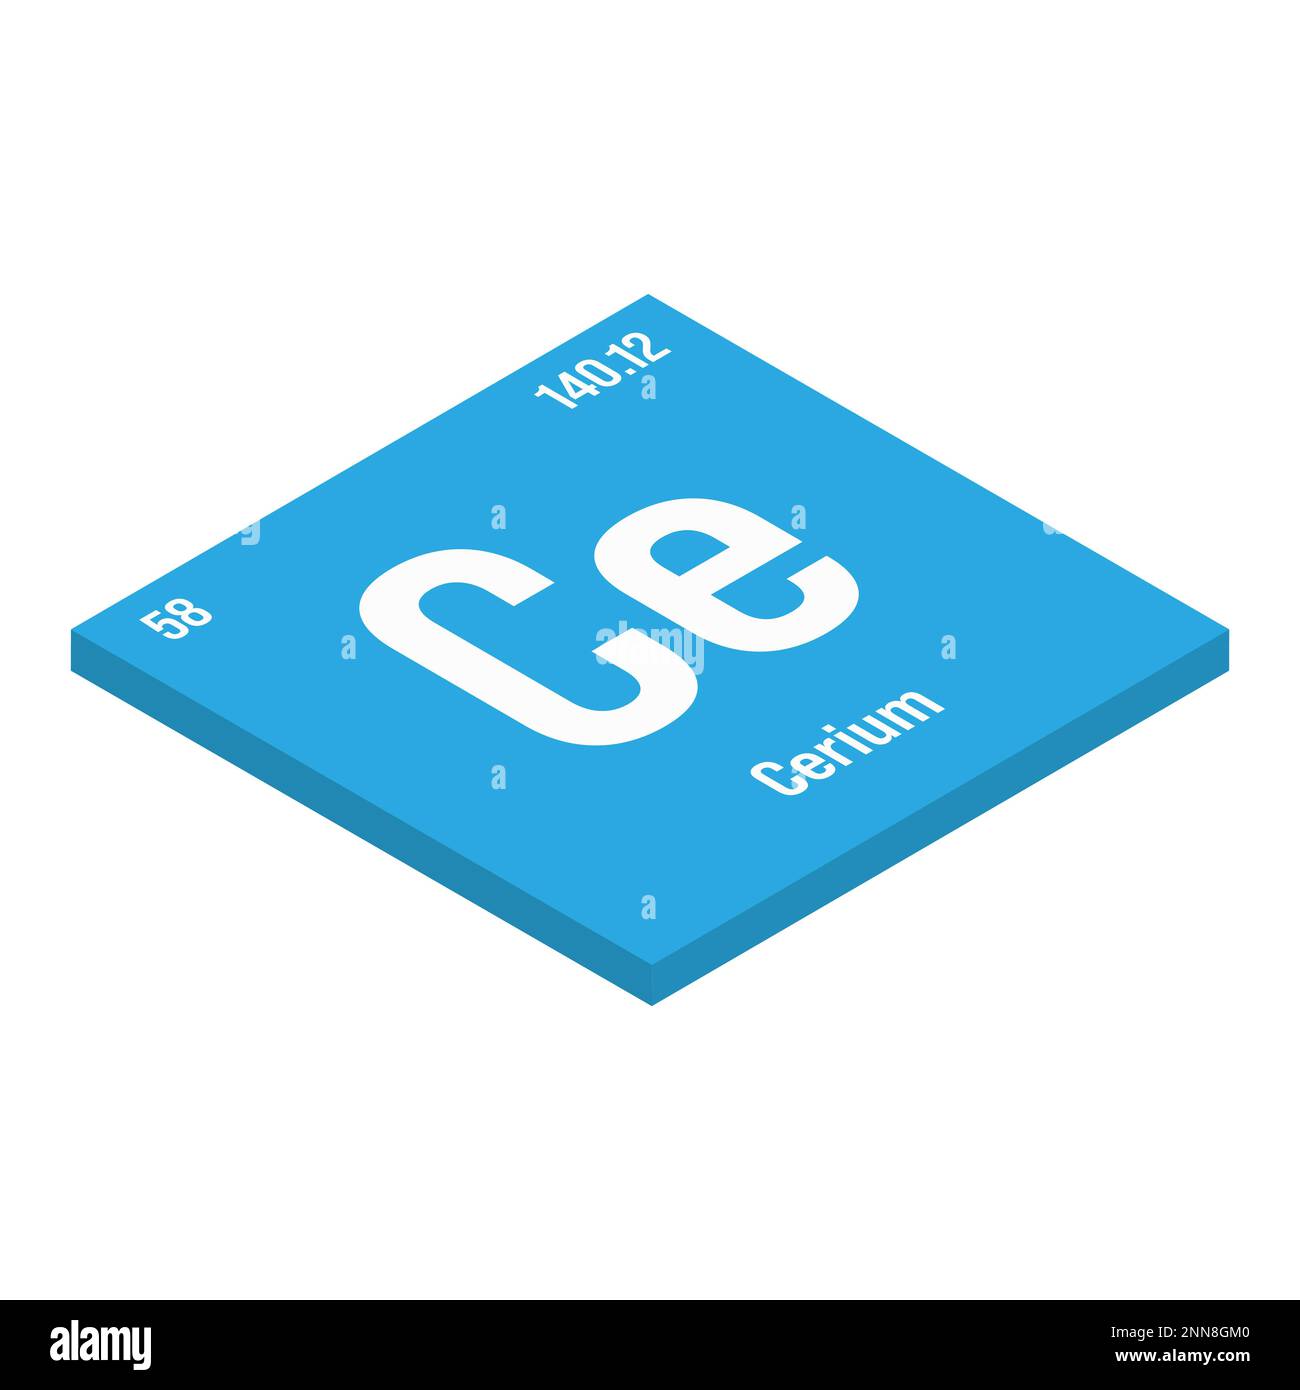 Cerium, Ce, periodic table element with name, symbol, atomic number and weight. Rare earth metal with various industrial uses, such as in catalytic converters, polishing agents, and as a component of lighter flints. Stock Vector